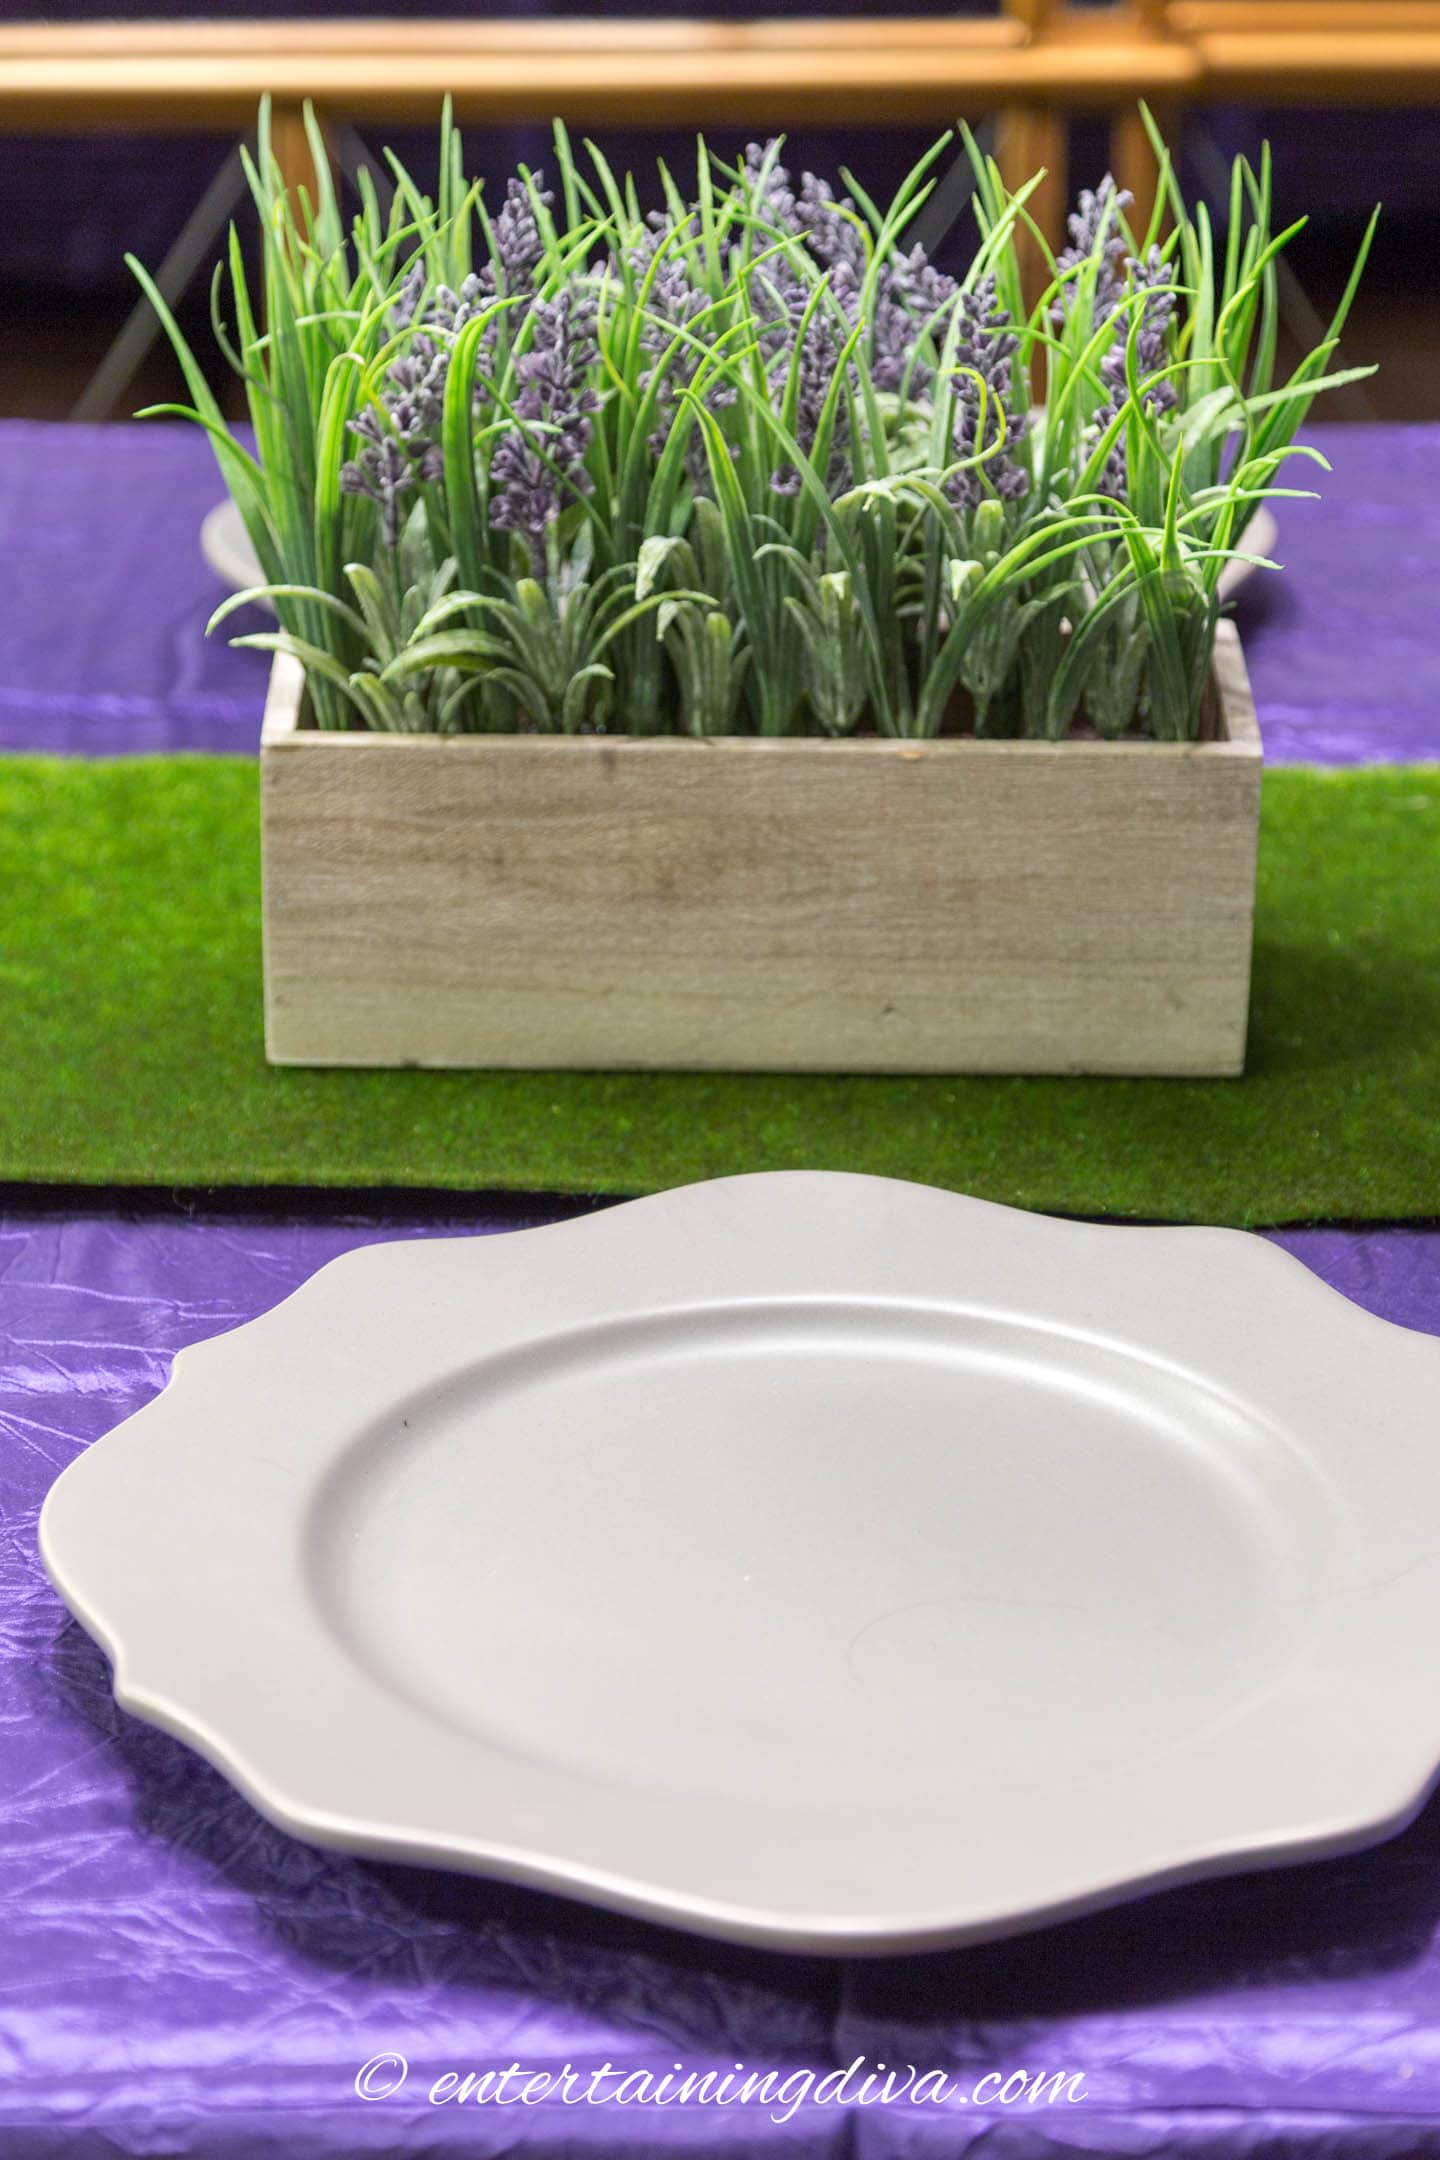 A gray charger on a purple tablecloth in front of a green and purple centerpiece